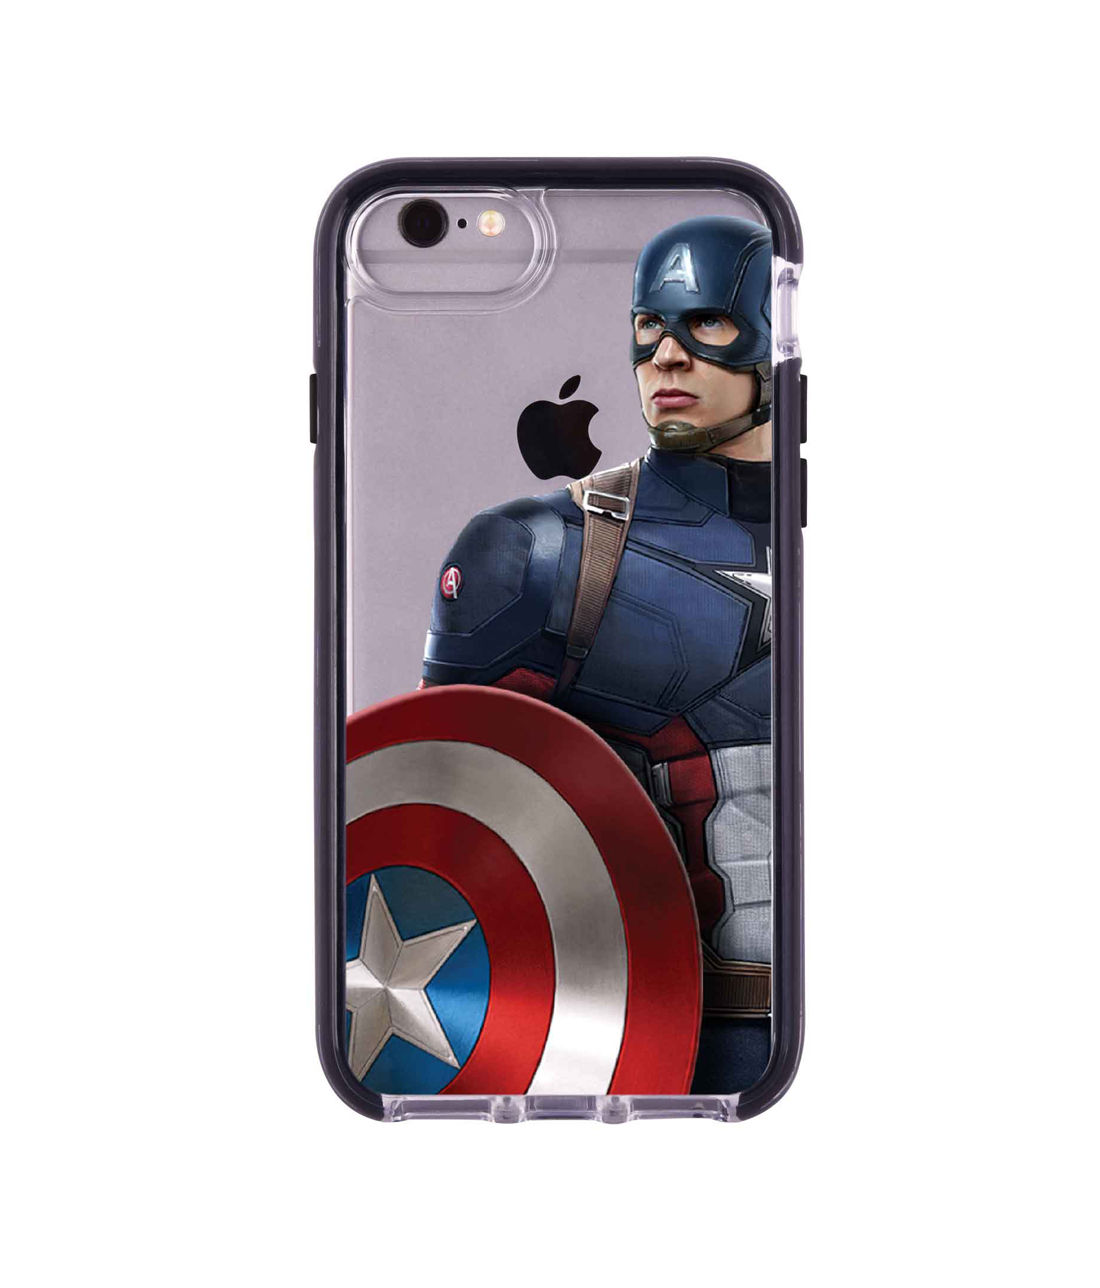 Team Blue Captain - Extreme Phone Case for iPhone 6S